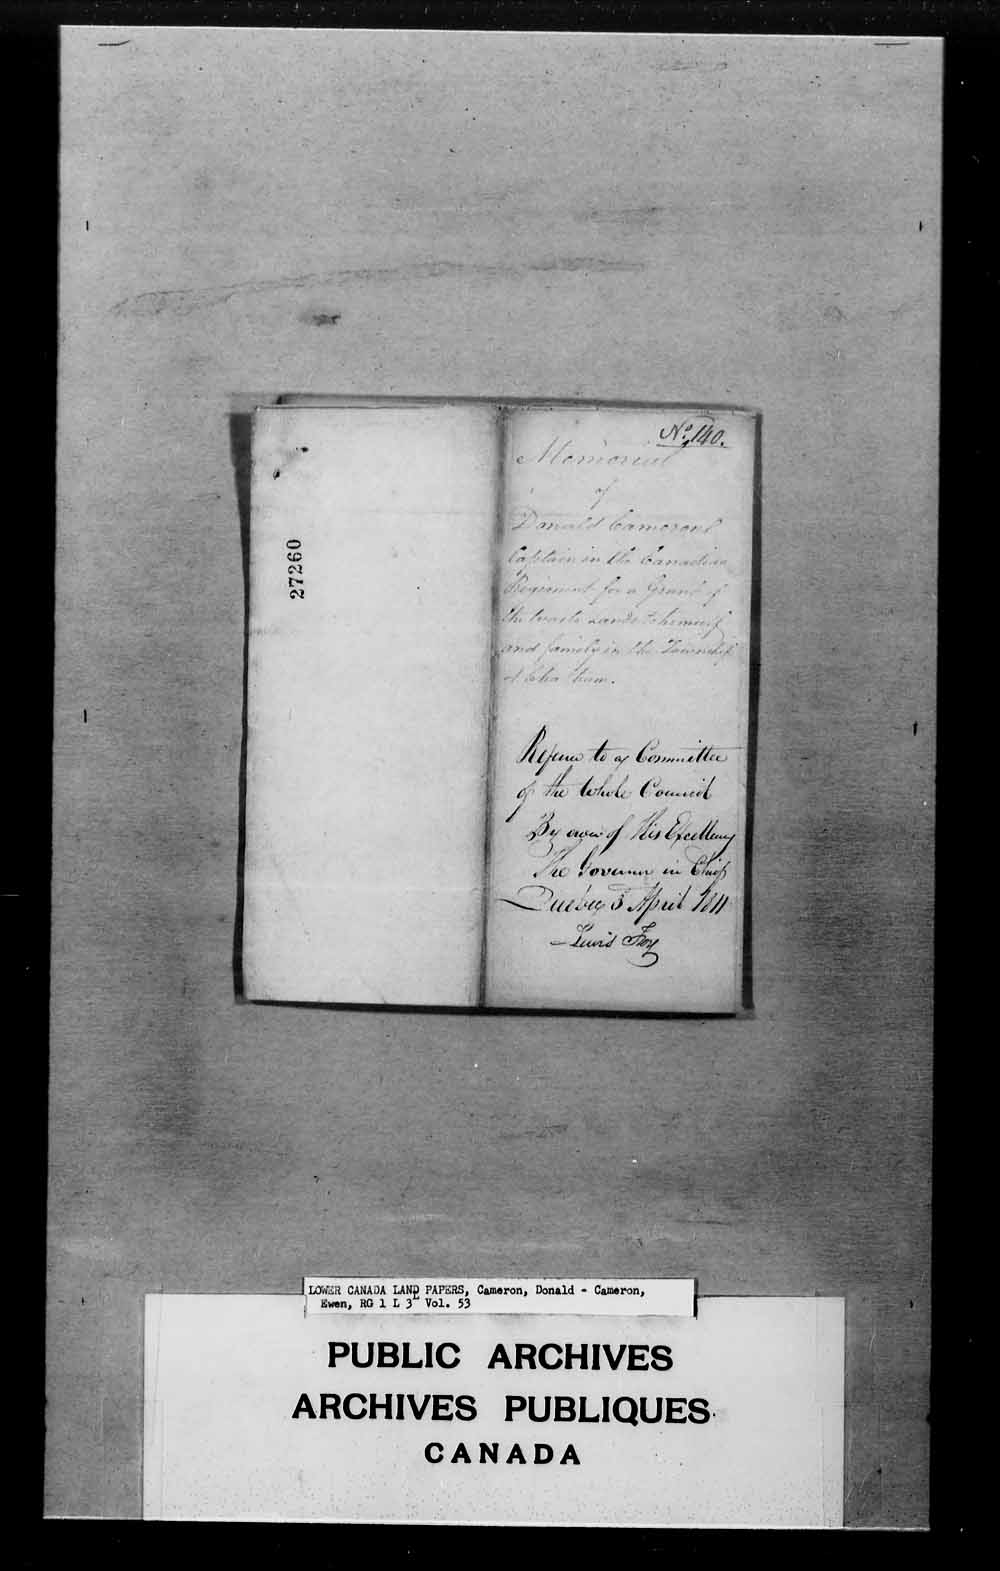 Digitized page of  for Image No.: e006611640